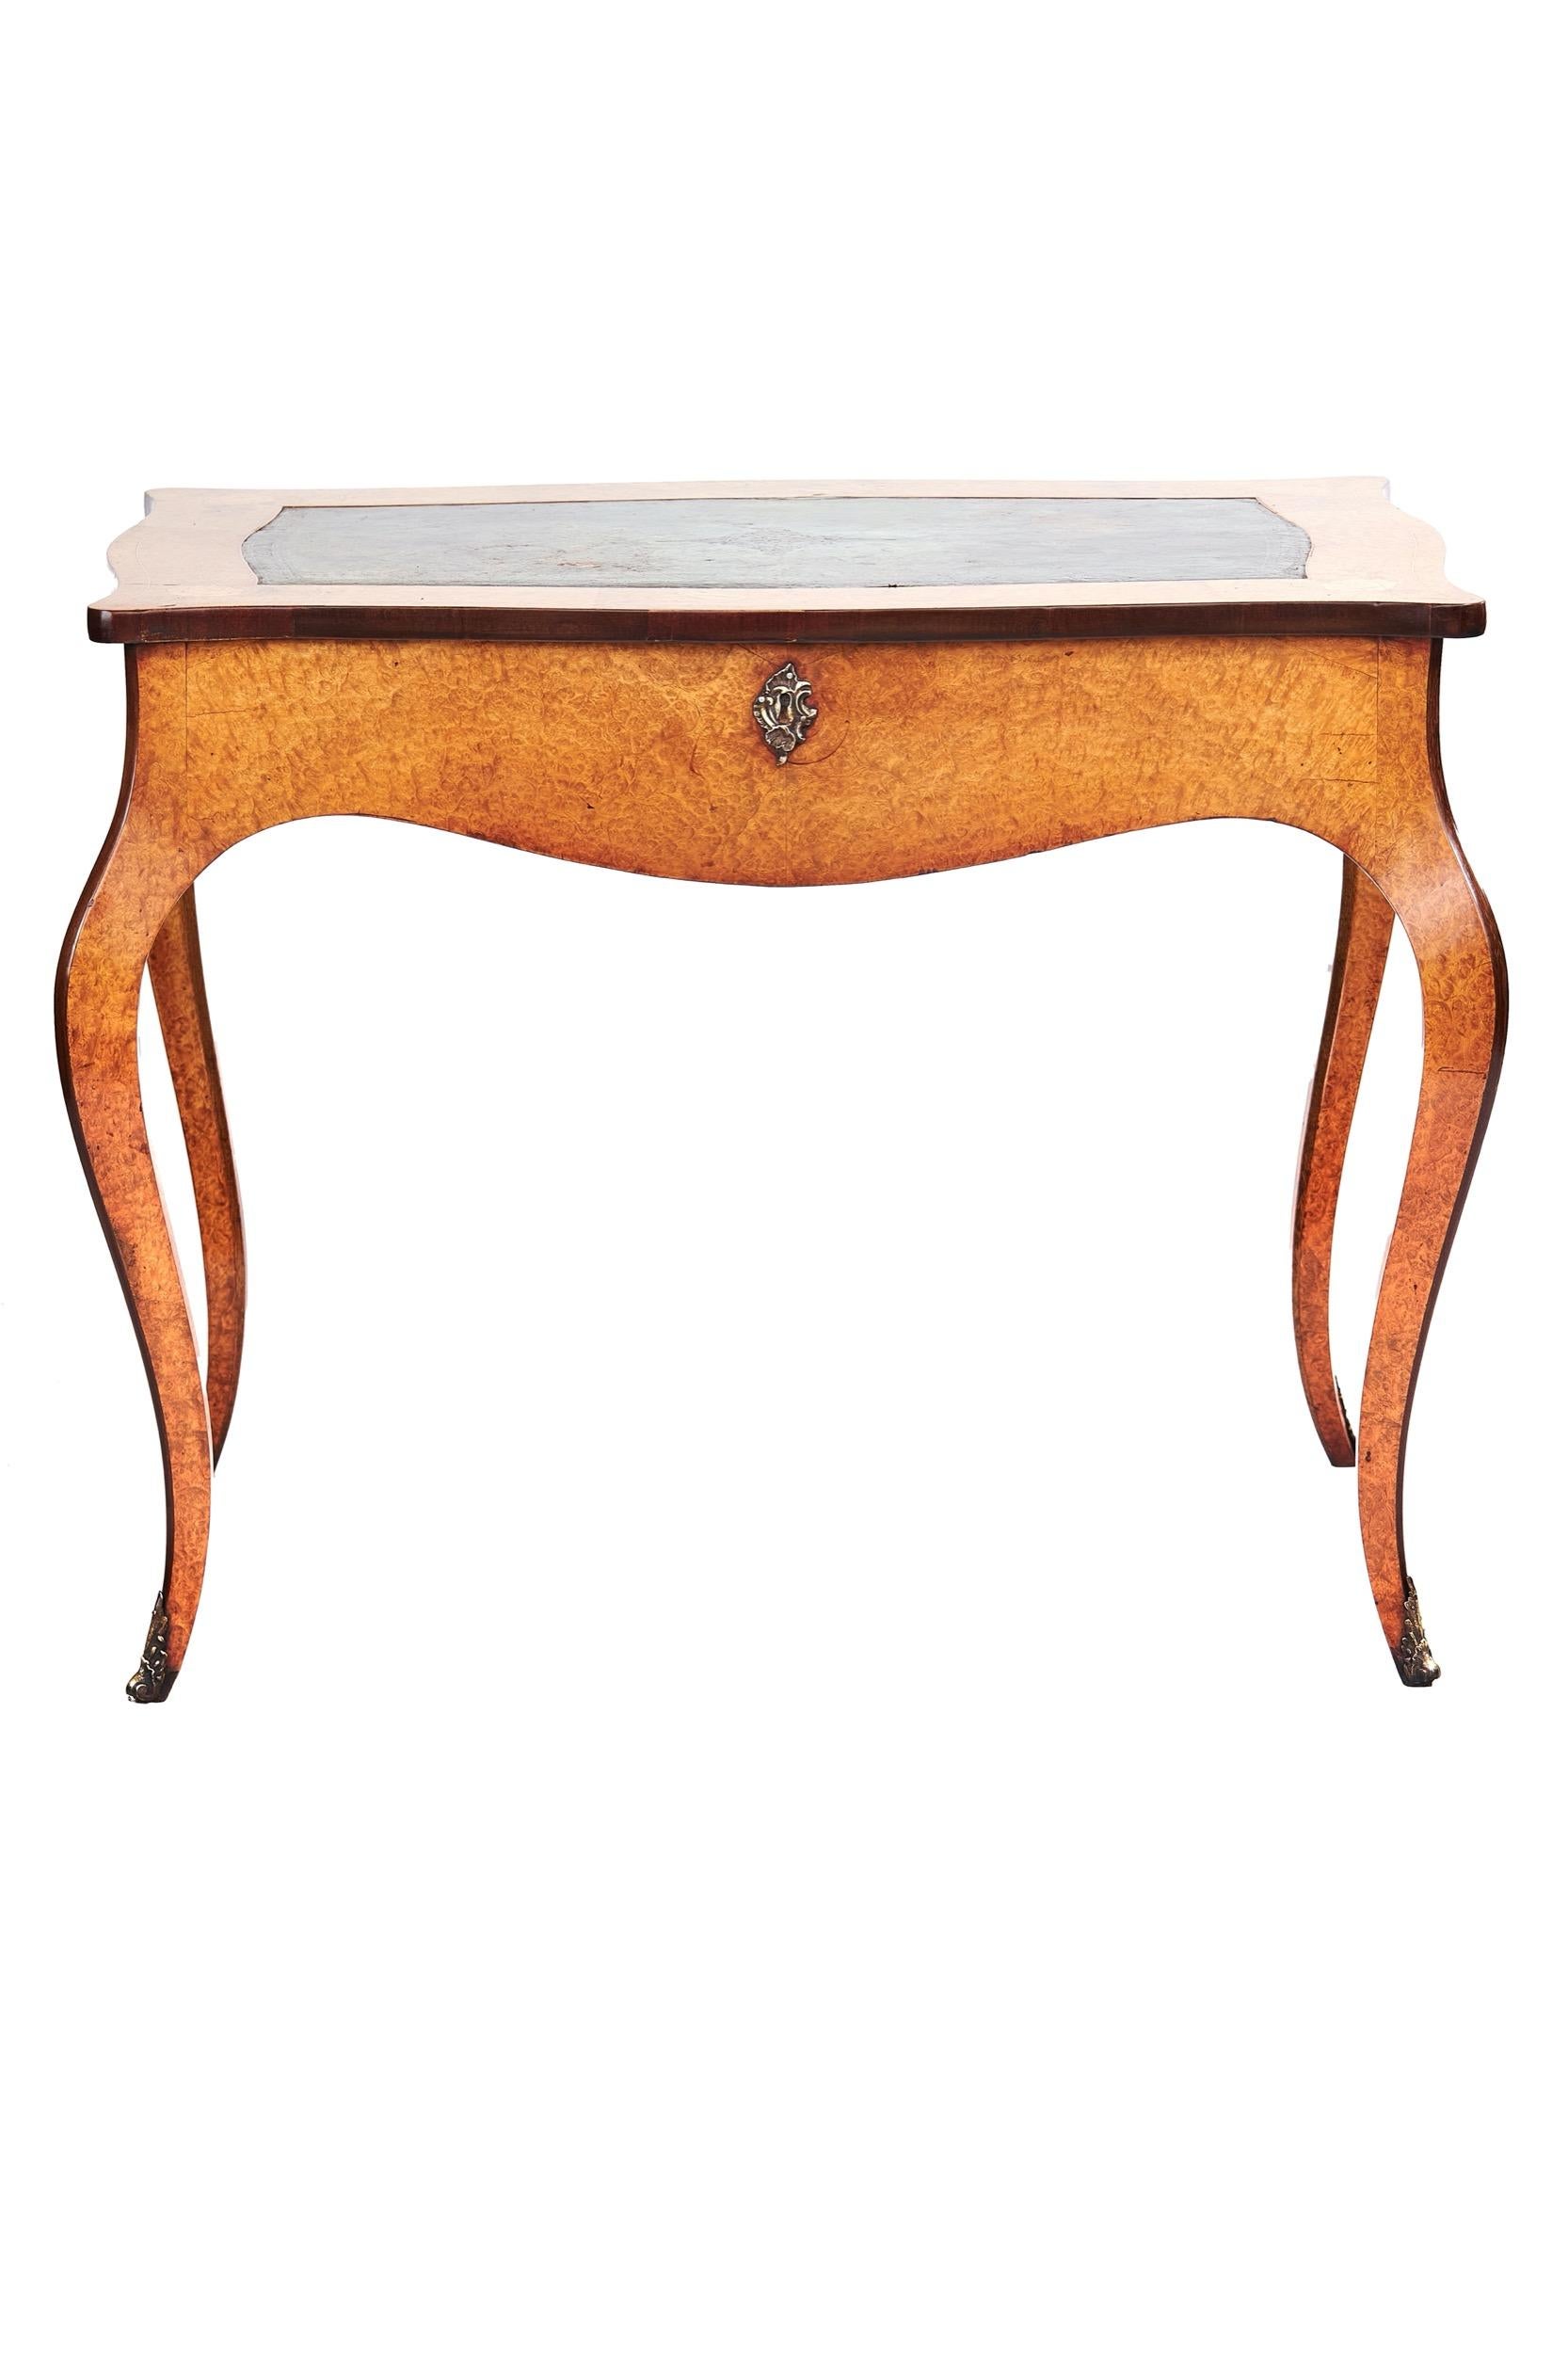 Fine C19th French Thuya wood & Marquetry  Bureau Plat In Good Condition For Sale In Dereham, GB